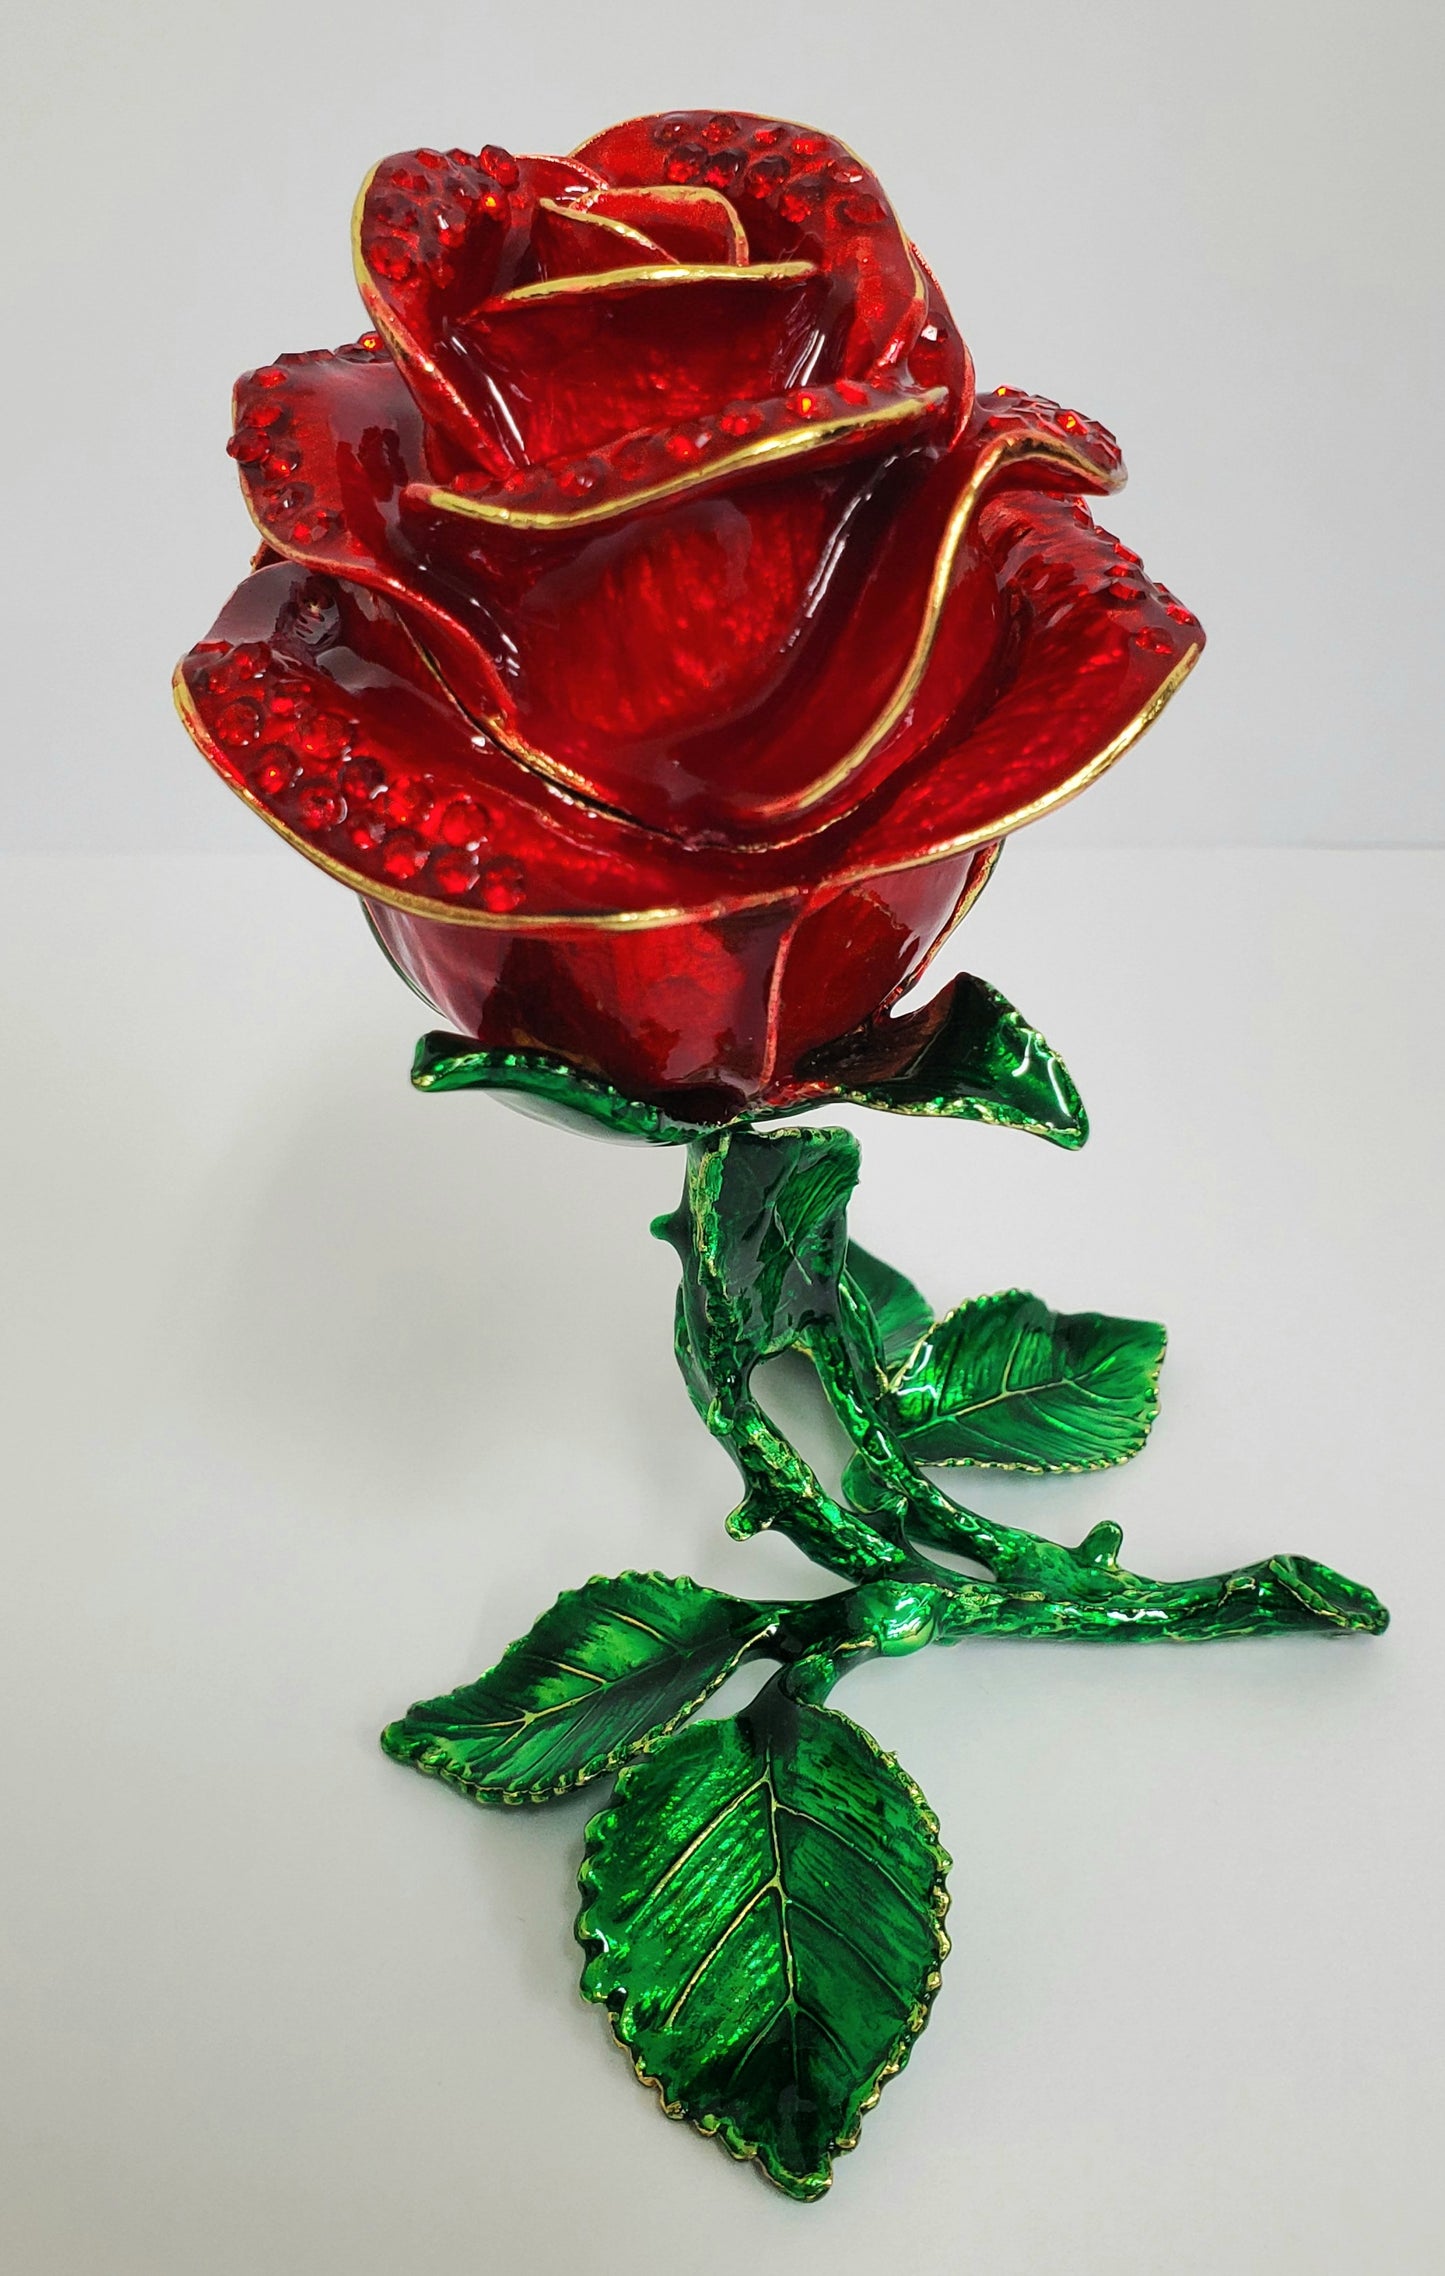 Red Rose Collector Bling Box/Sobriety Chip Holder (with "Bloom" Chip)